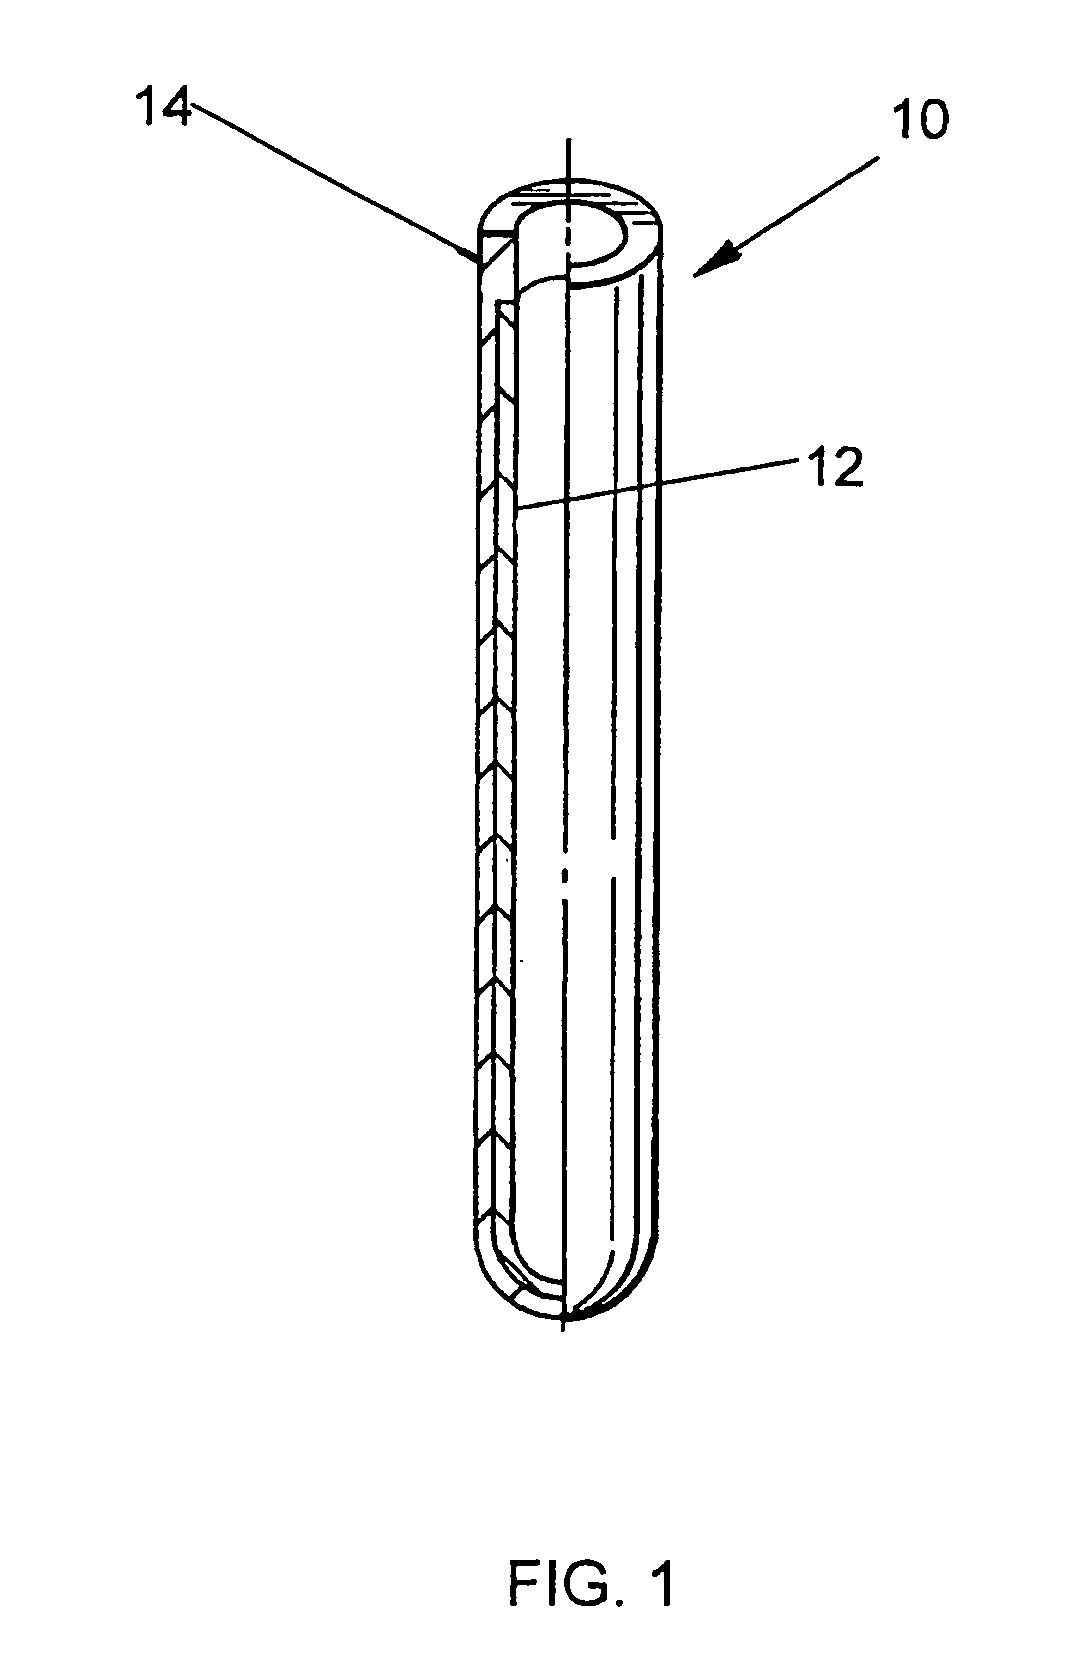 Clad tube for nuclear fuel